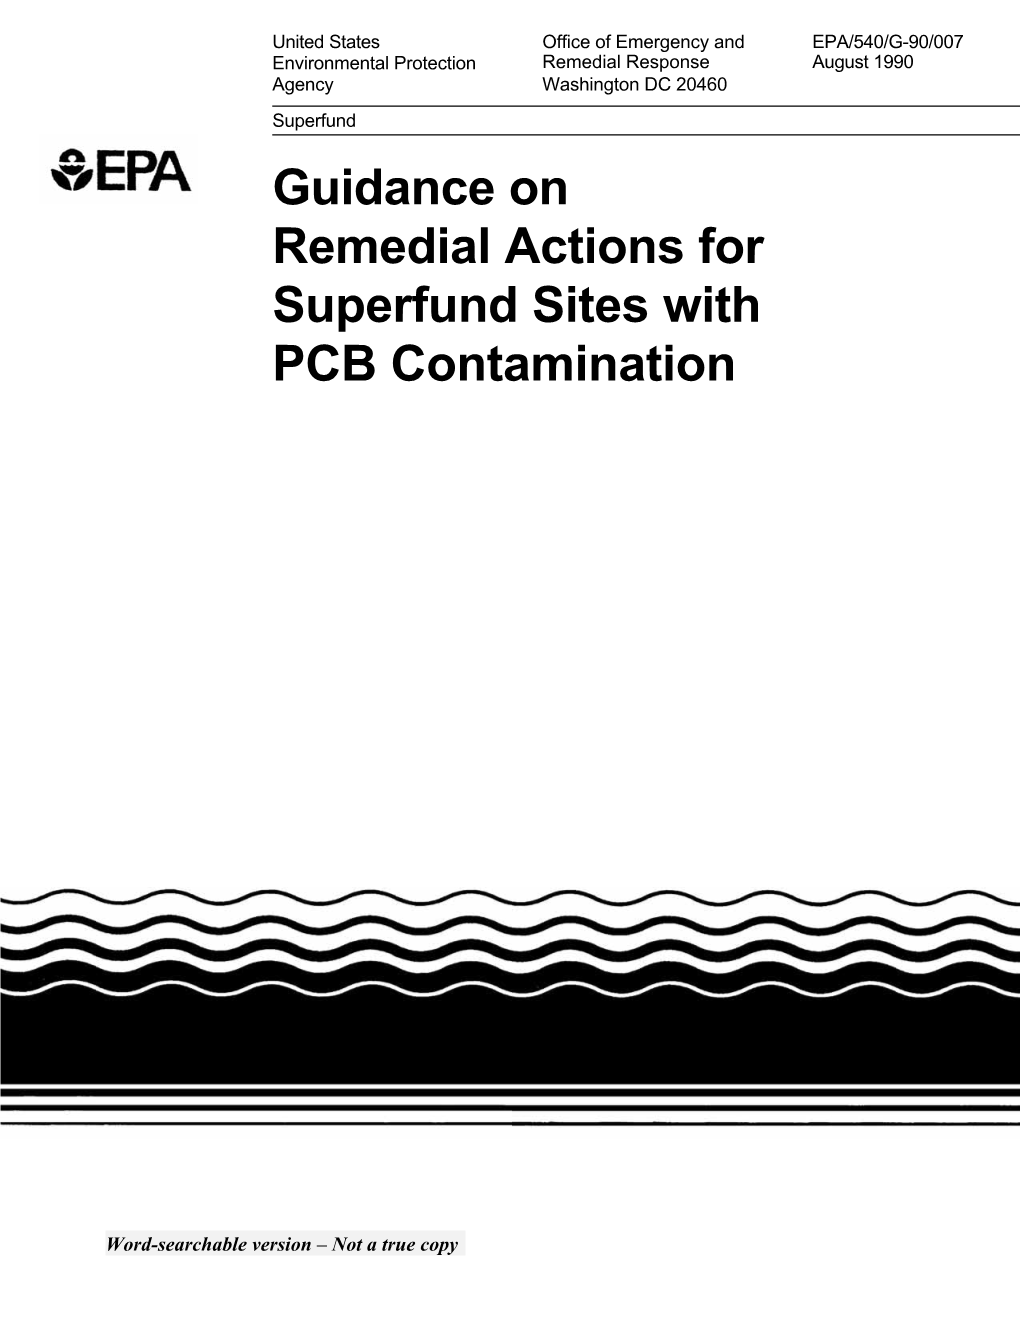 Guidance on Remedial Actions for Superfund Sites with PCB Contamination